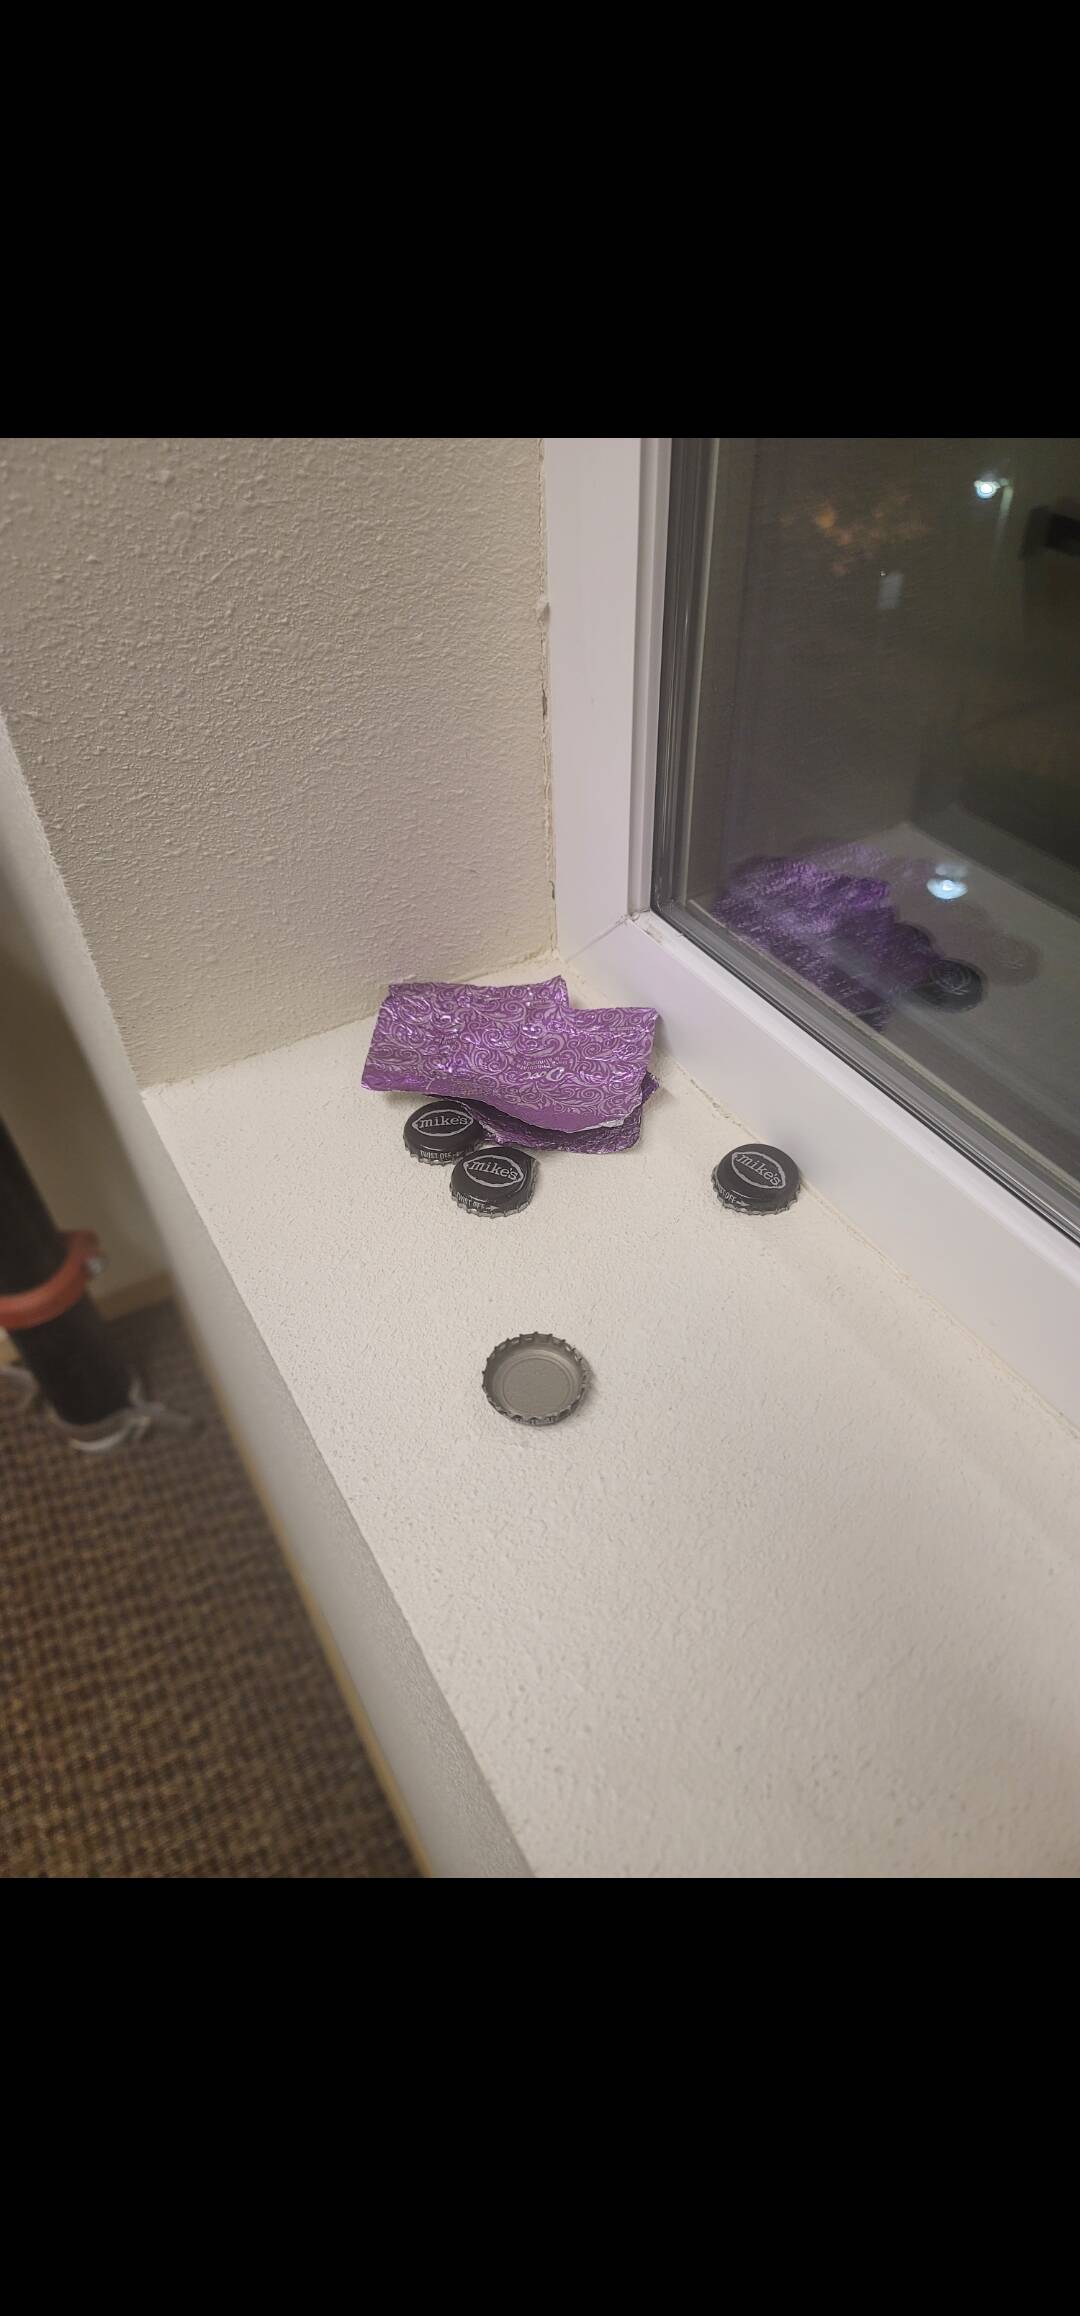 Bottle caps and other drug-related trash was left behind by an intruder into the apartment building. Photo provided by SHAG resident Frank Fields